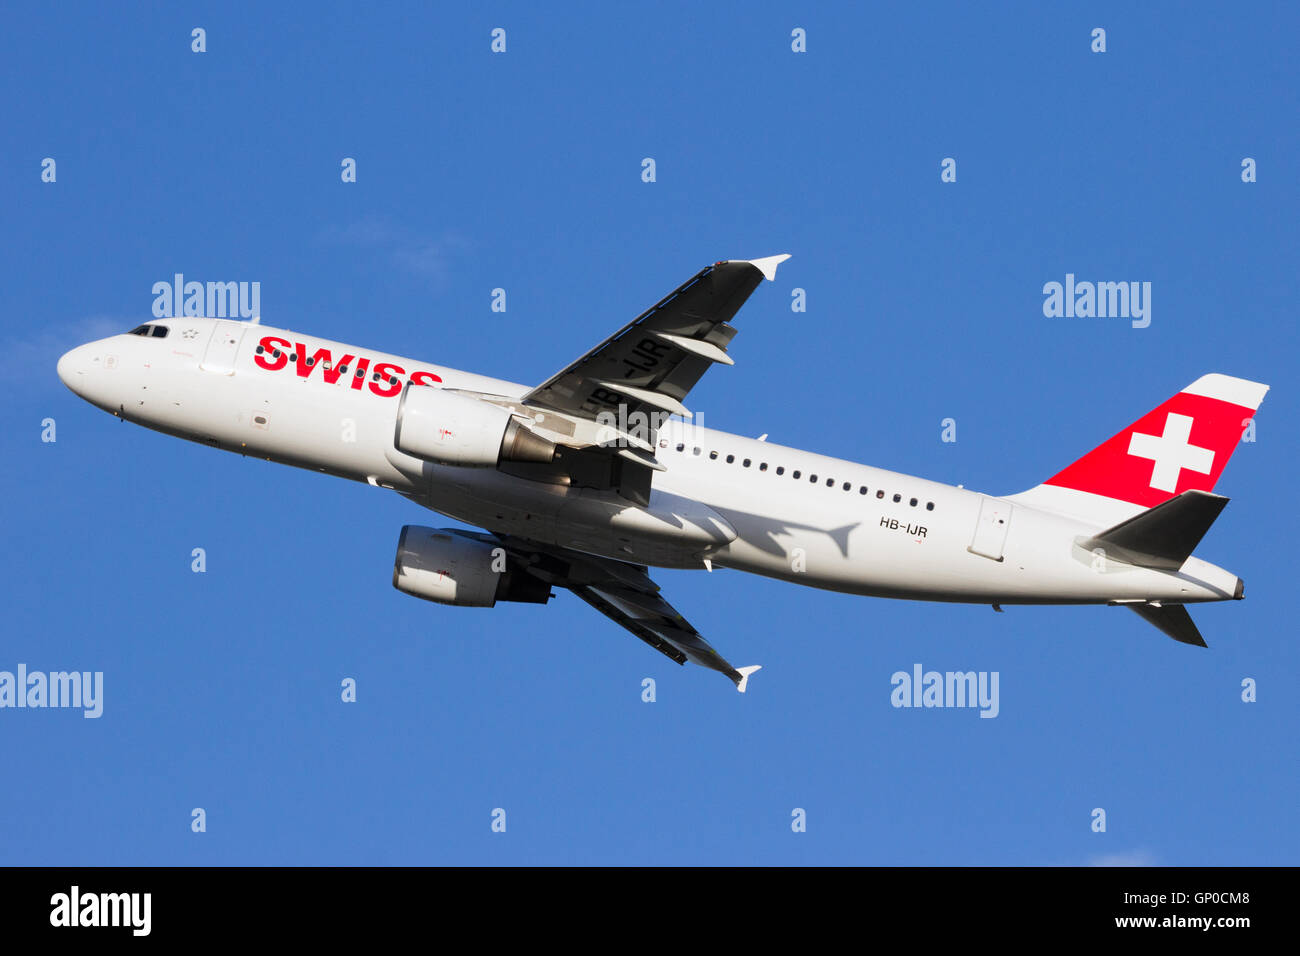 Swiss International Airlines Airbus A320 take-off from Dusseldorf airport. Stock Photo